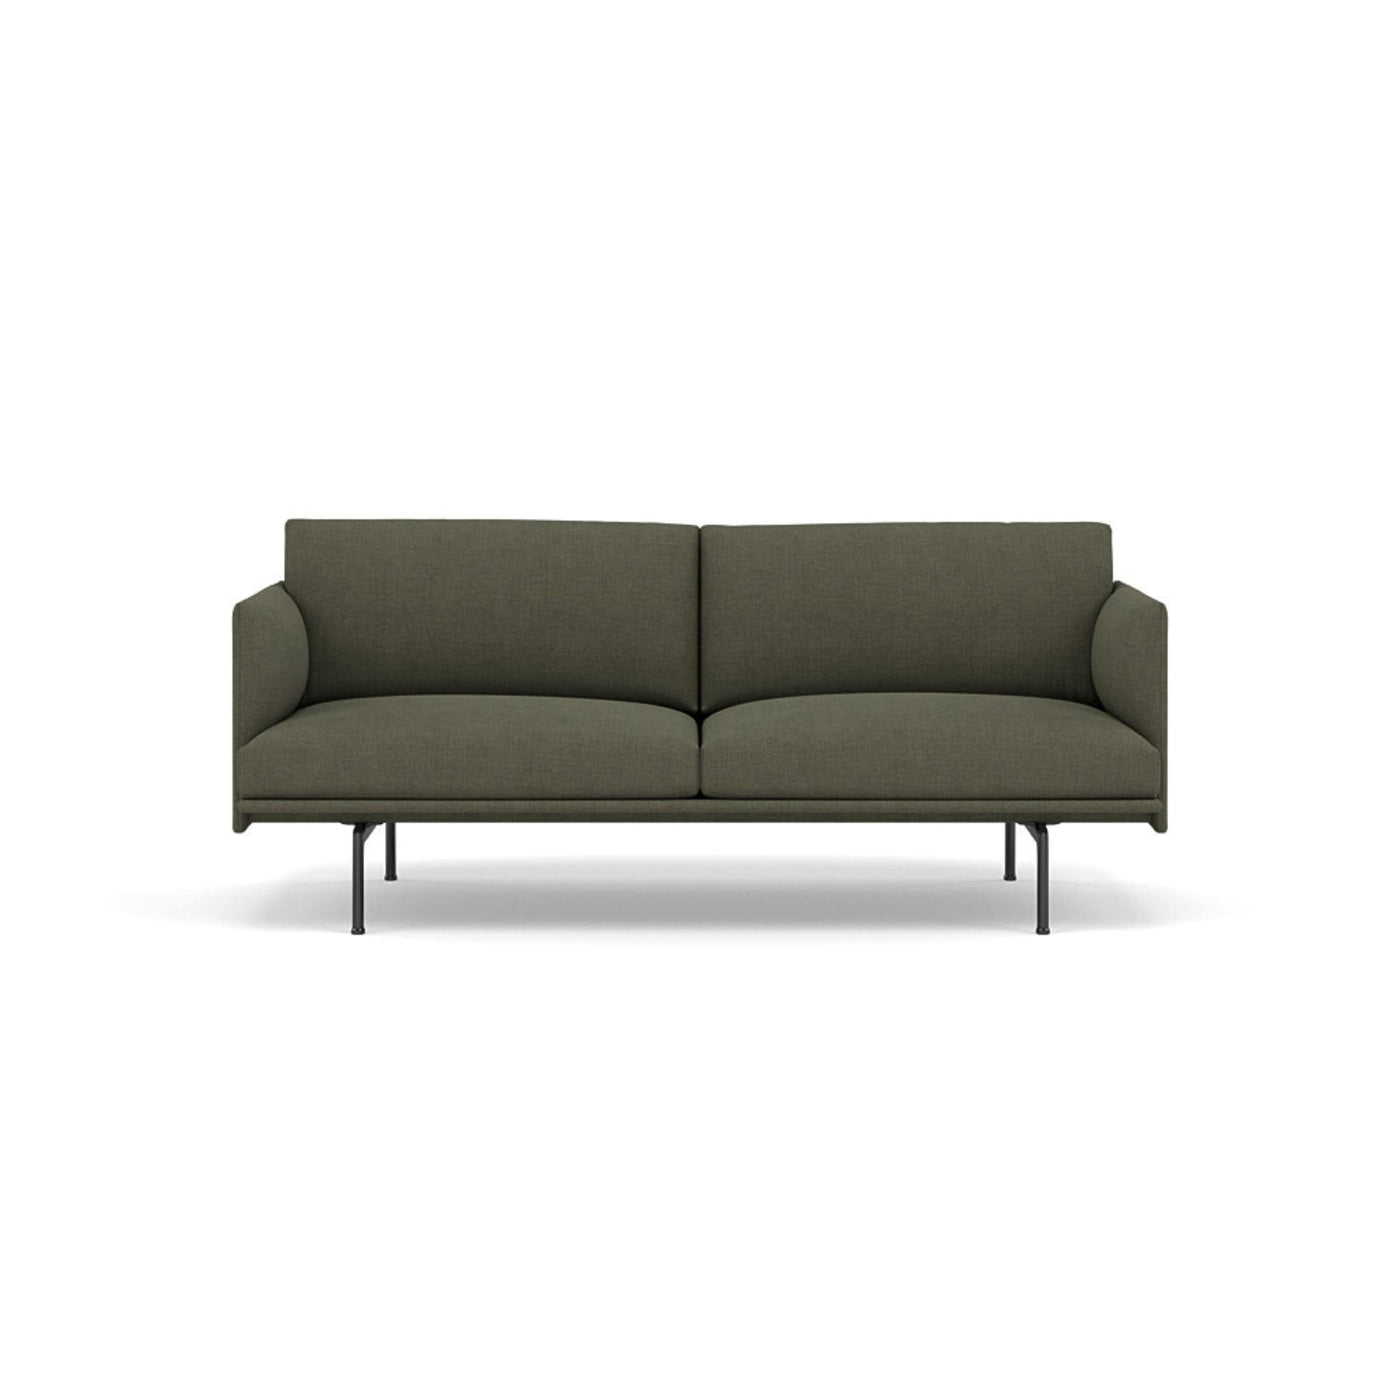 Muuto Outline Studio Sofa 170 in Fiord 961 and black legs. Made to order from someday designs #colour_fiord-961